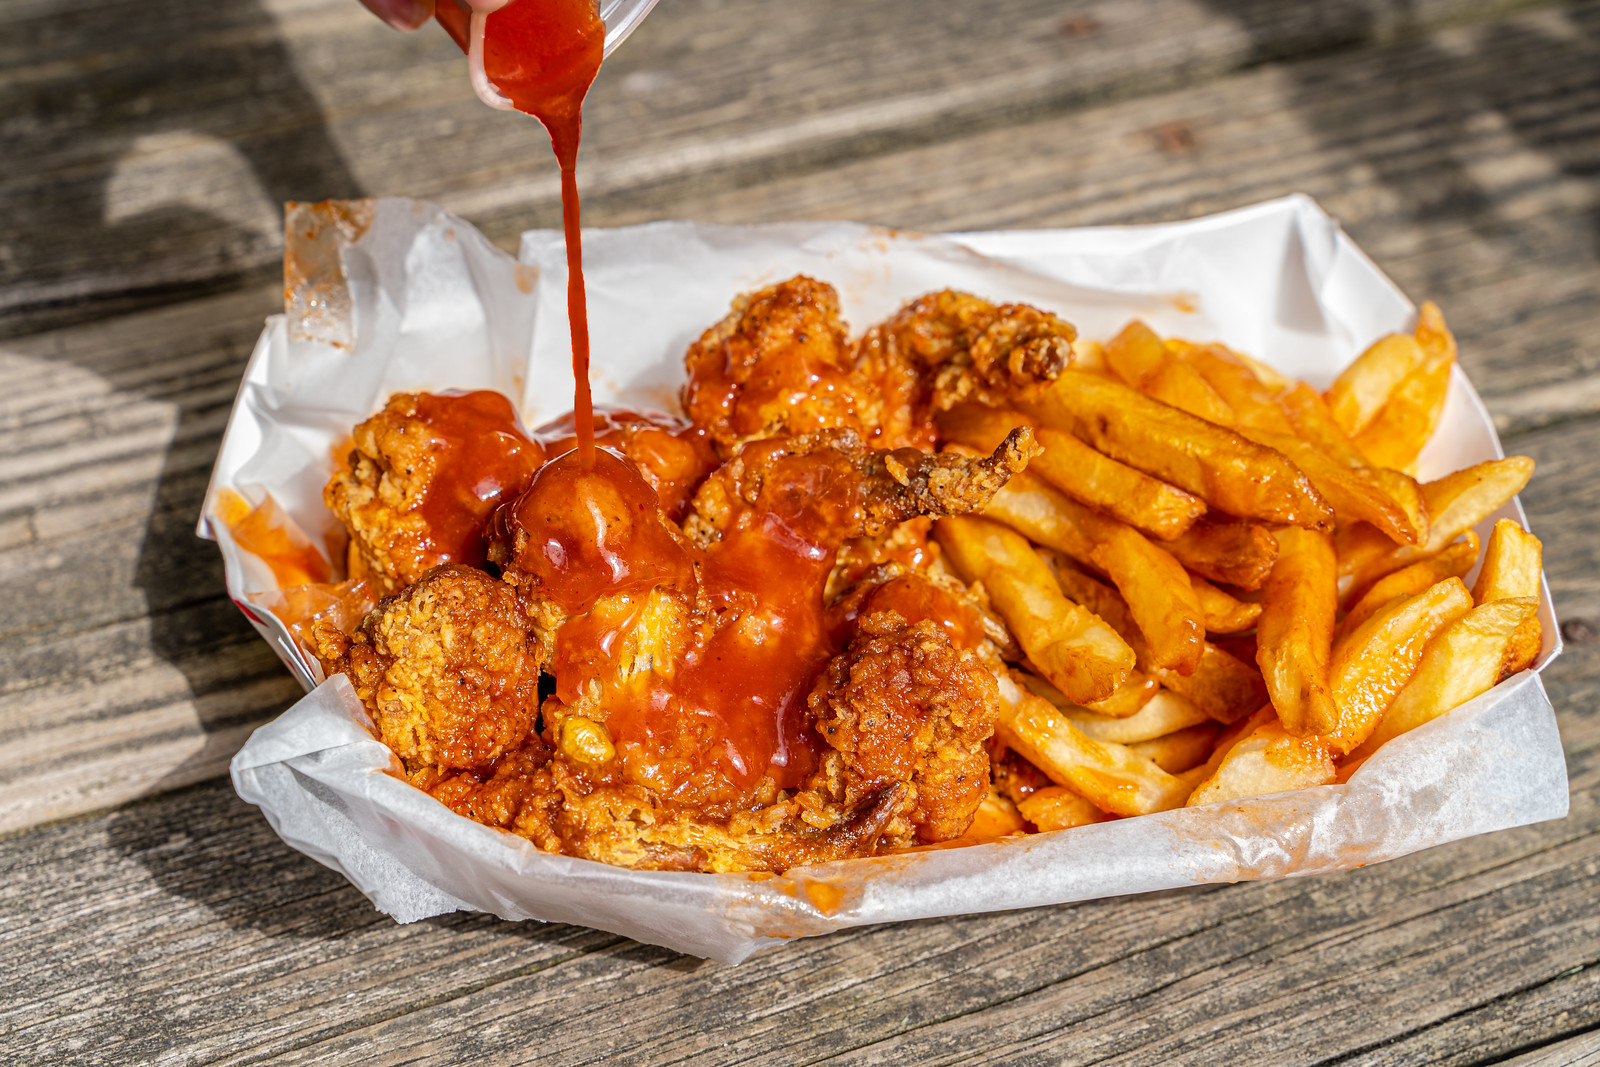 A basket of fried chicken with mild sauce.